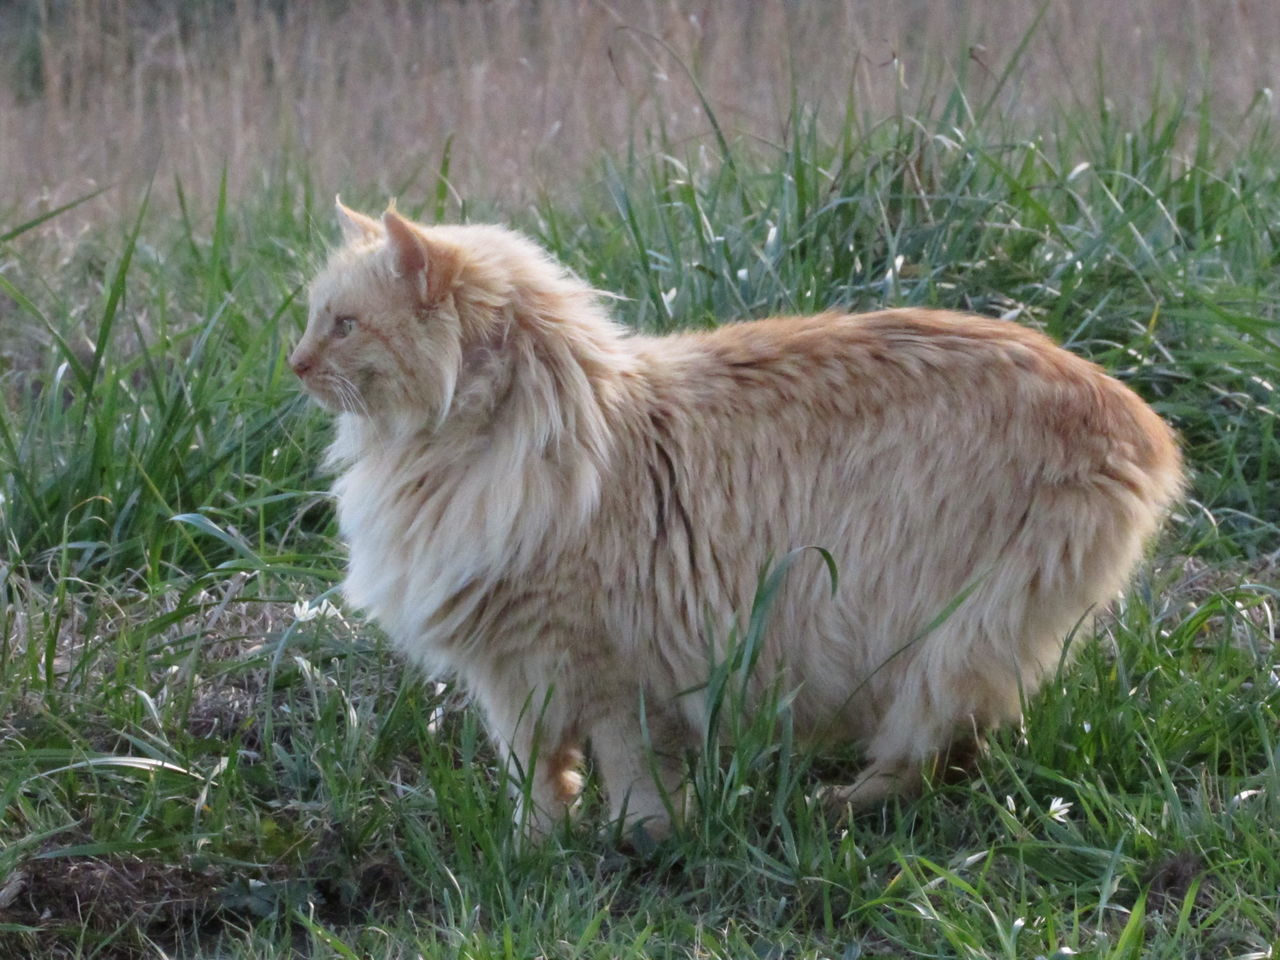 SIDE VIEW OF A CAT LYING ON GRASS